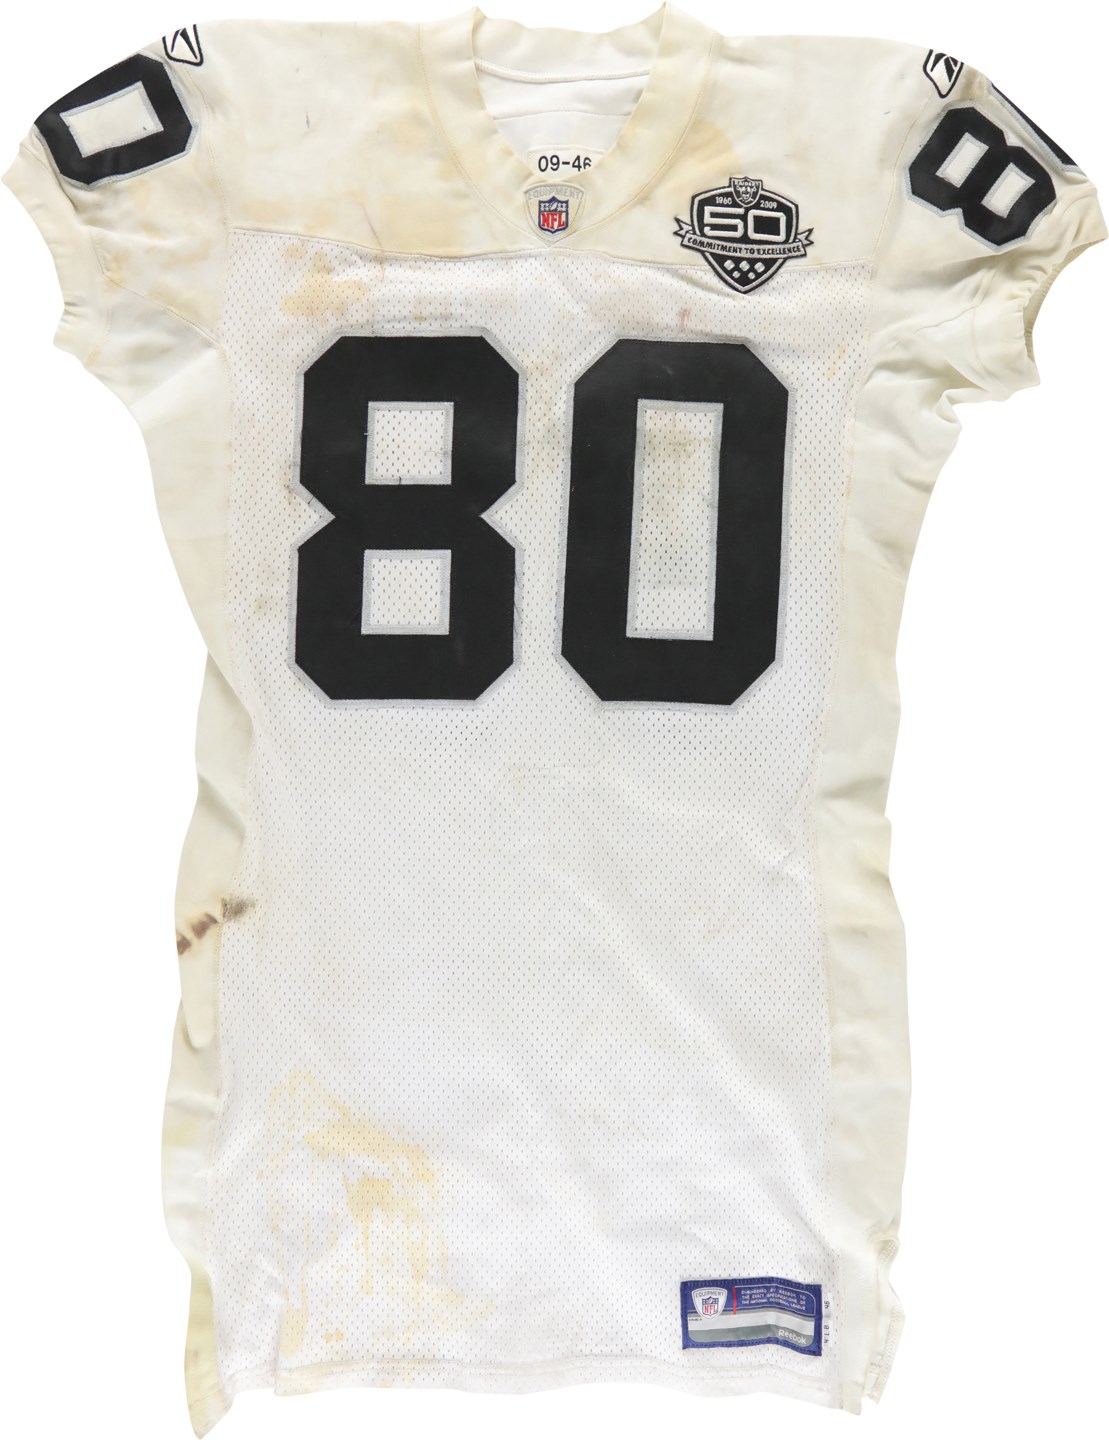 Football - 11/1/09 Zach Miller Unwashed Oakland Raiders Game Worn Jersey (Photo-Matched)